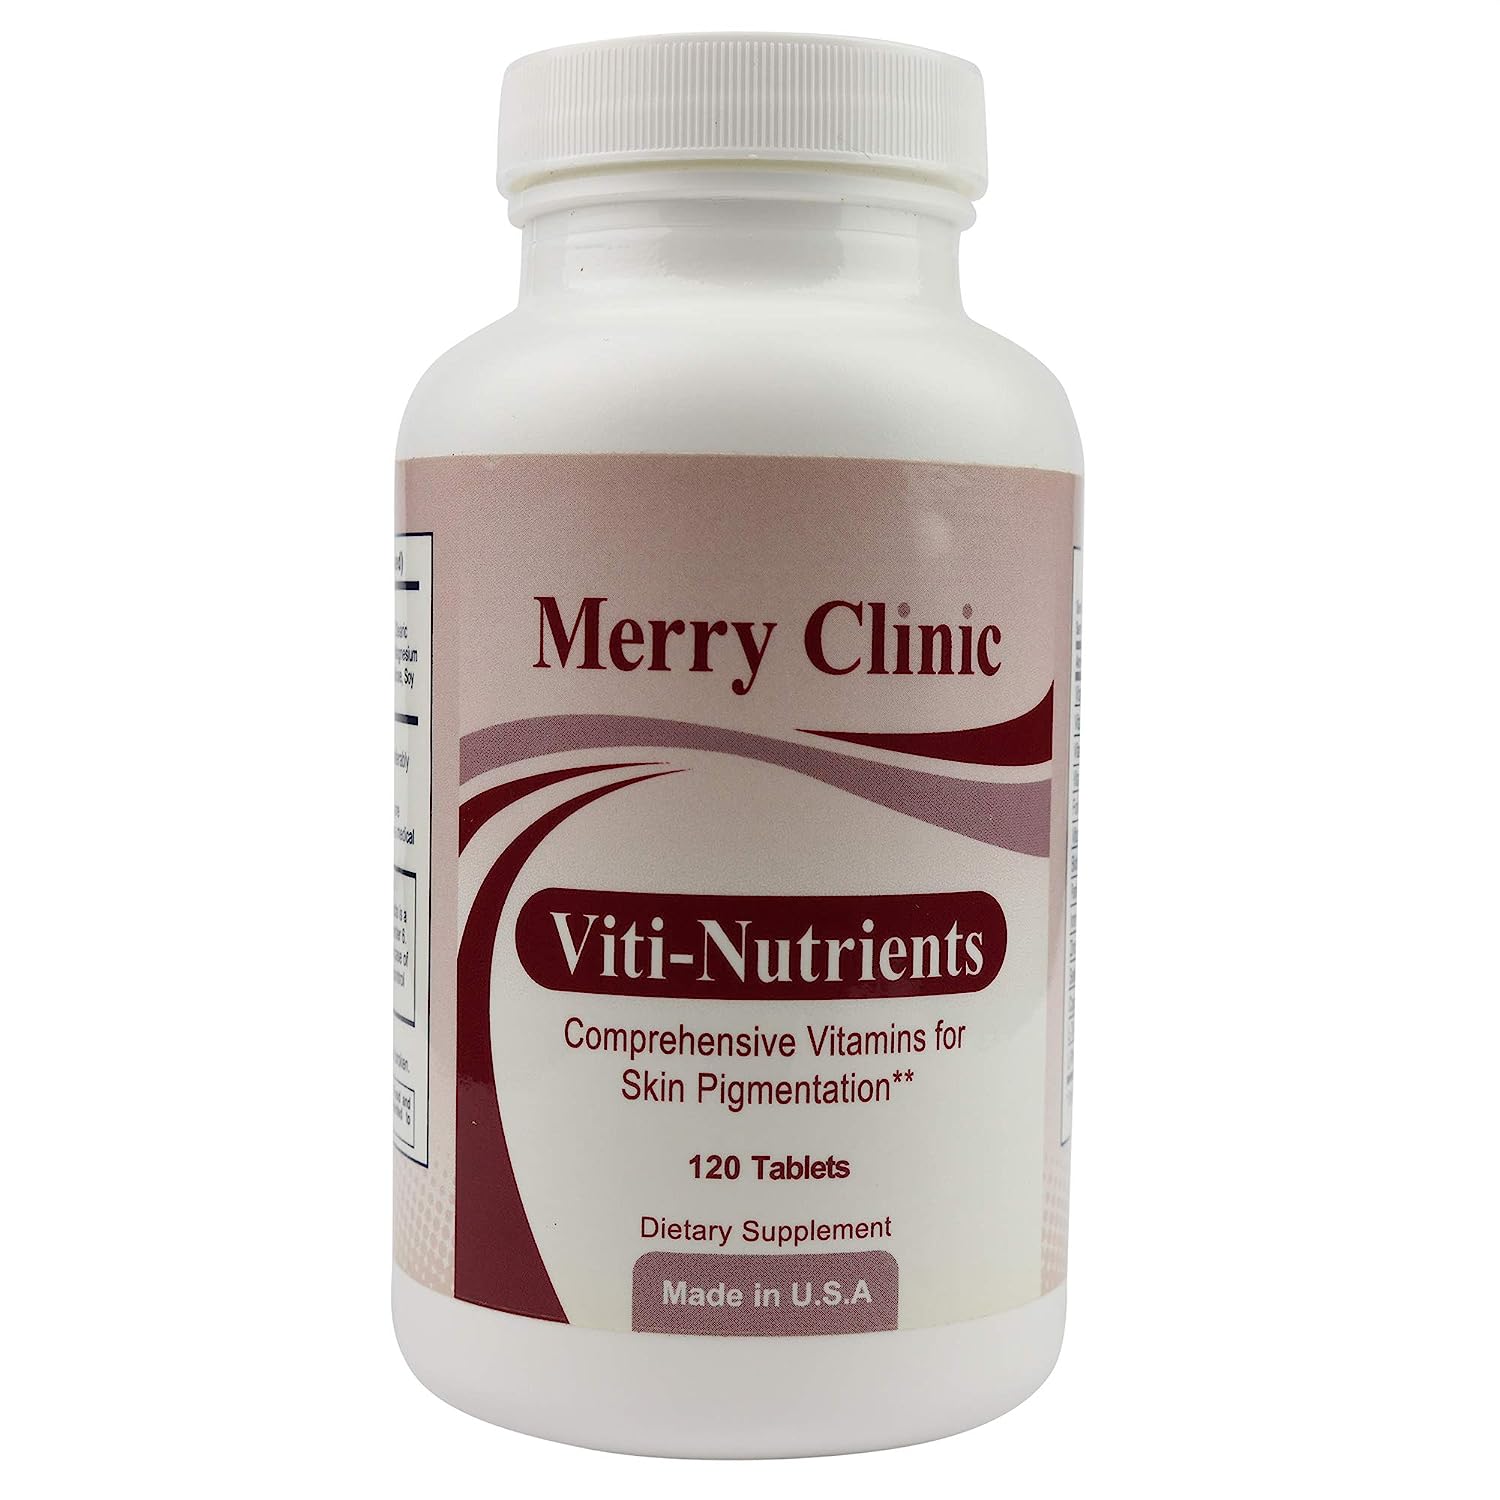 Viti-Nutrient, Nutrients for skin pigmentation and [...]